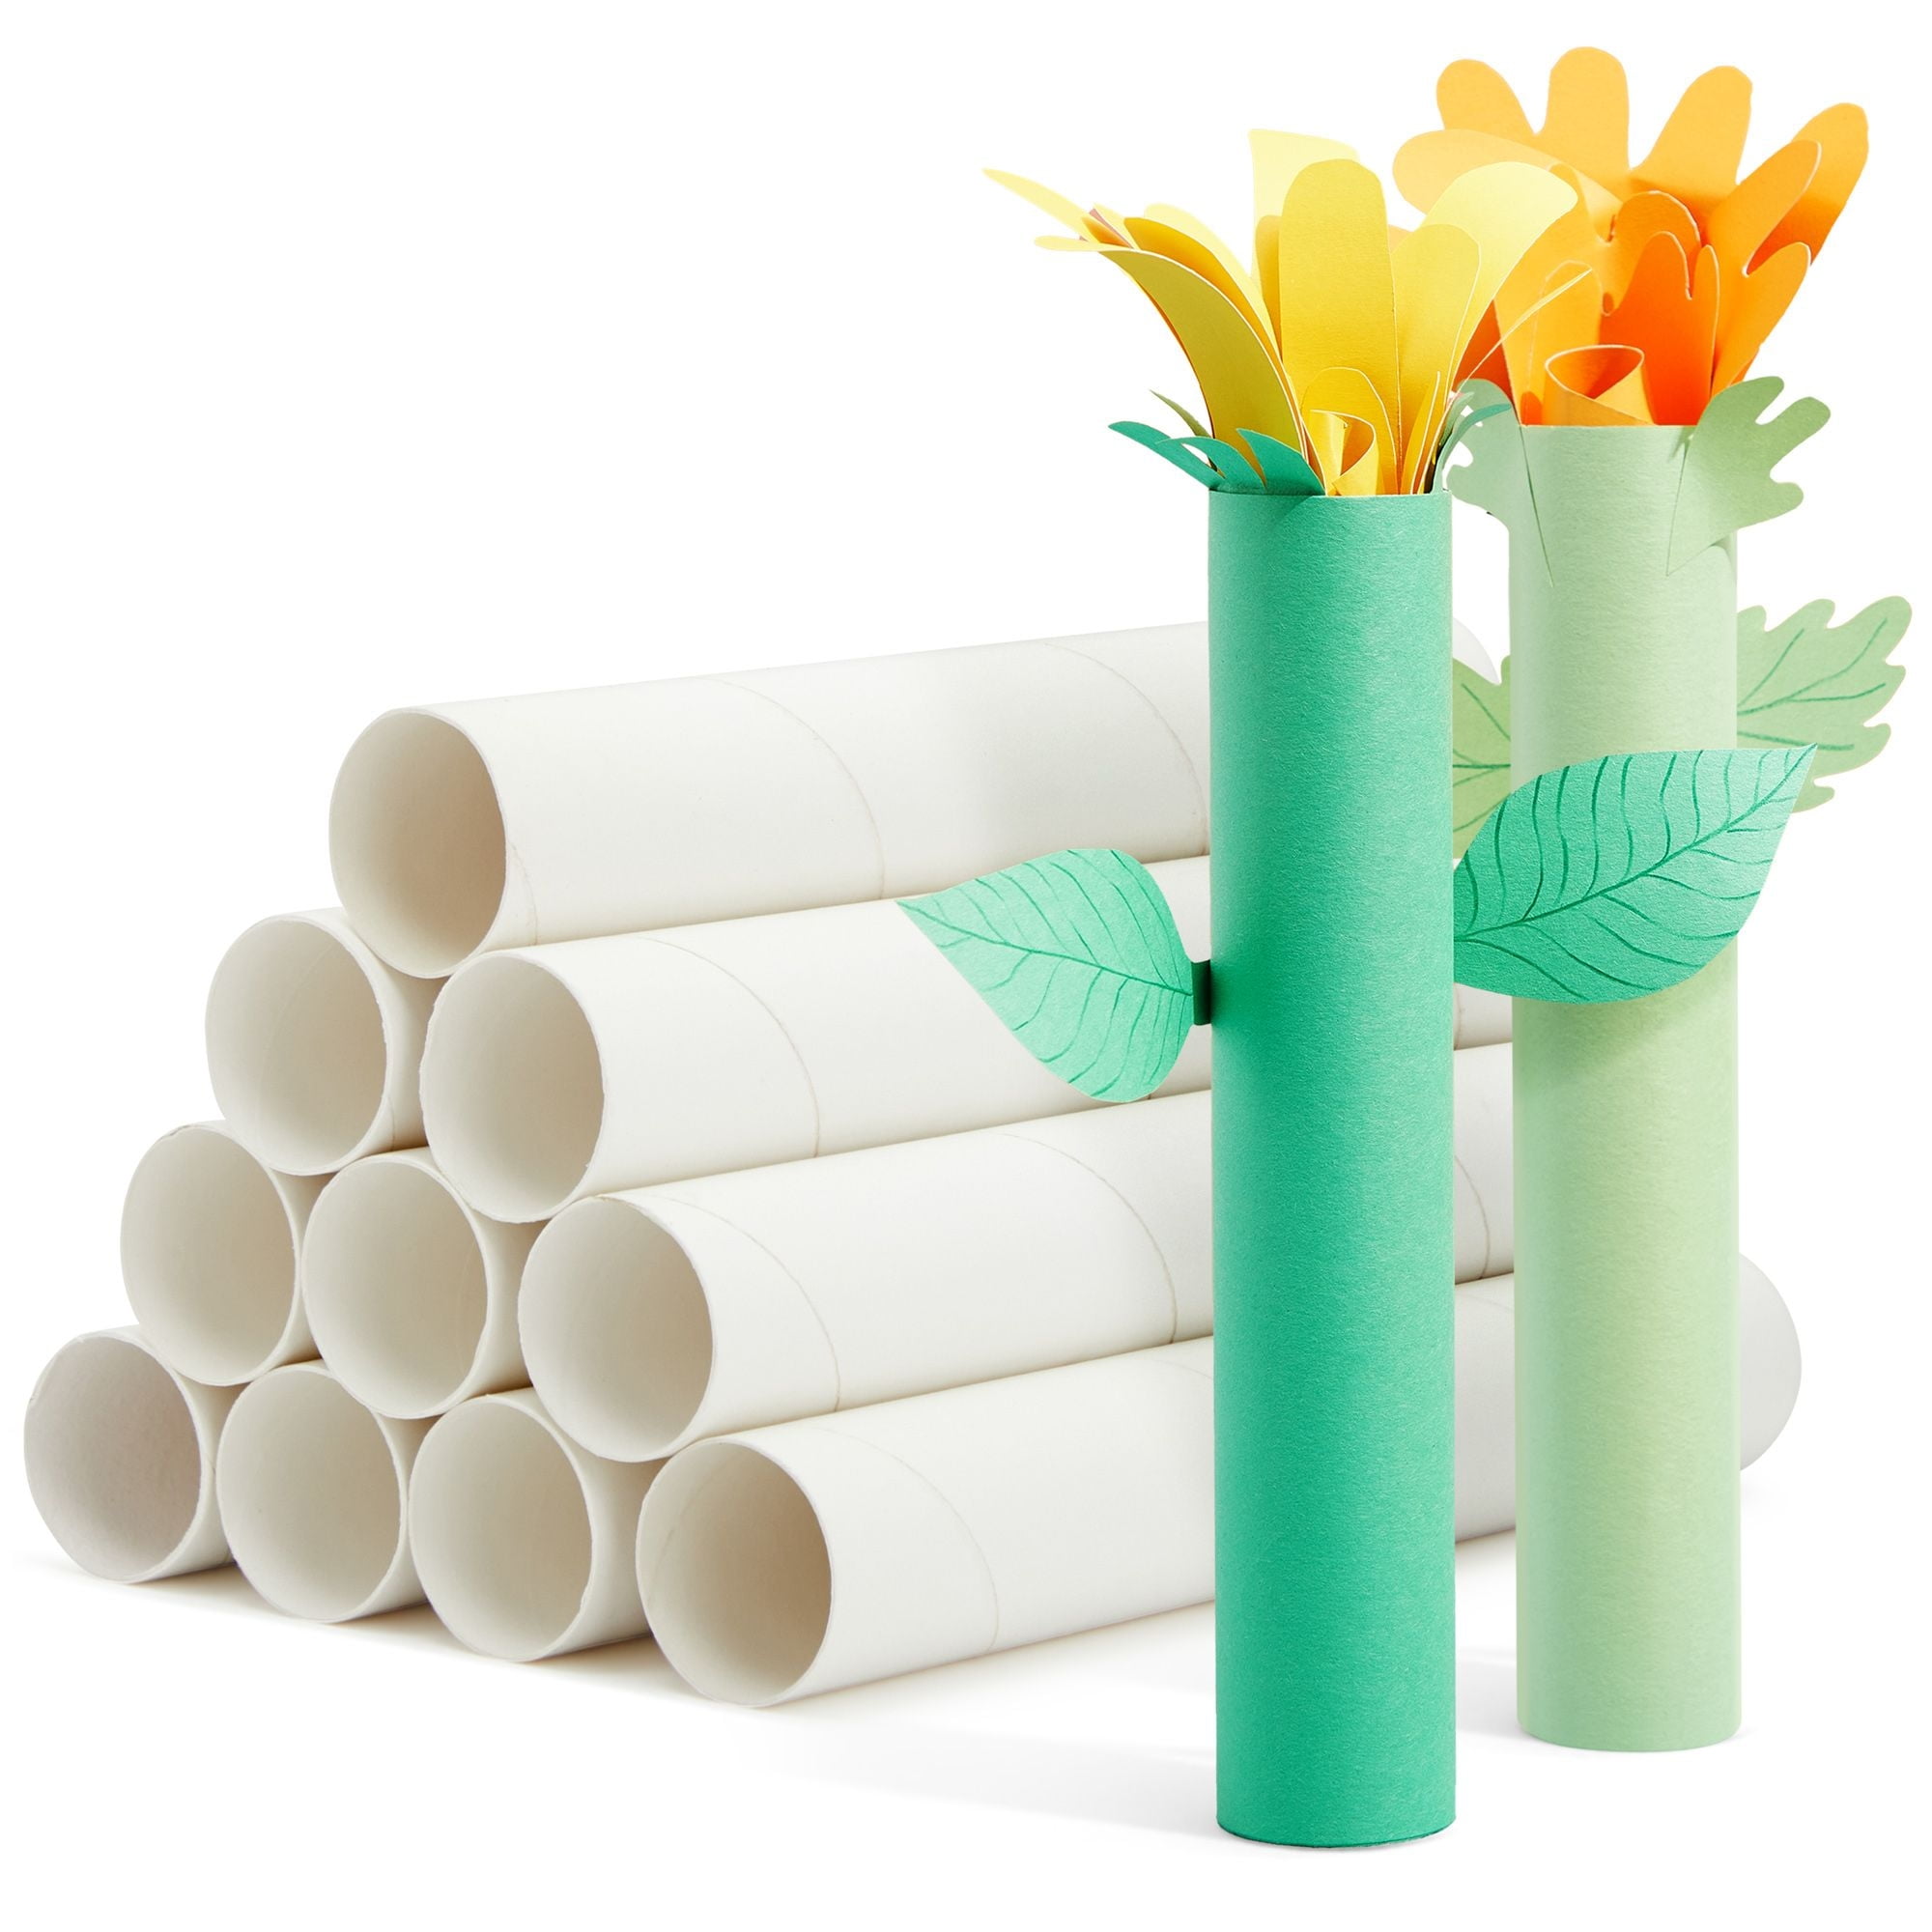 56pcs DIY Paper Colored Construction Paper Cardboard Cones for